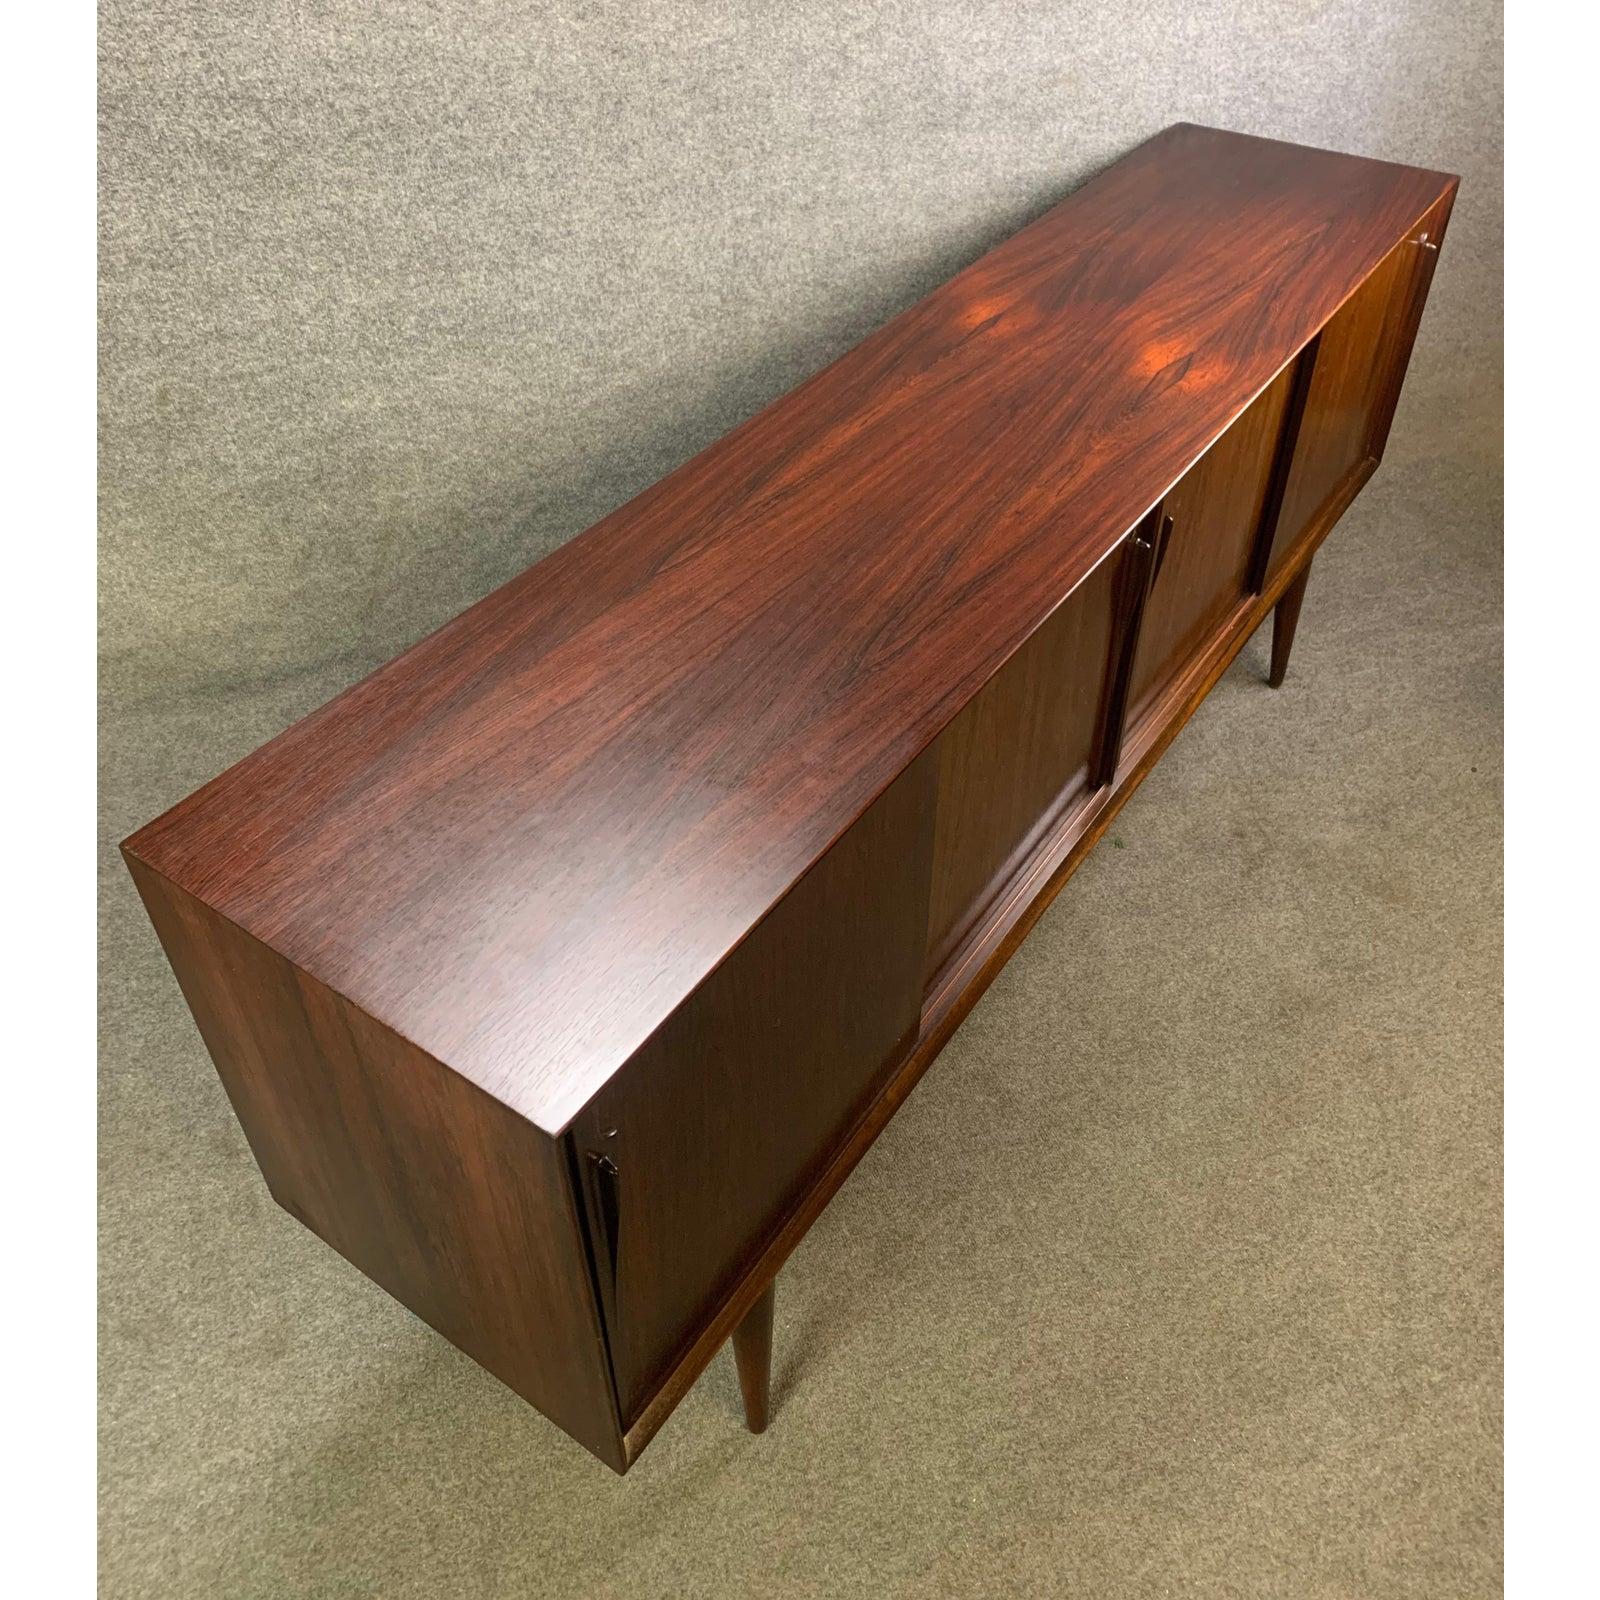 Vintage Danish Mid-Century Modern Rosewood Credenza by Gunni Oman for Omann Jun  In Good Condition For Sale In San Marcos, CA